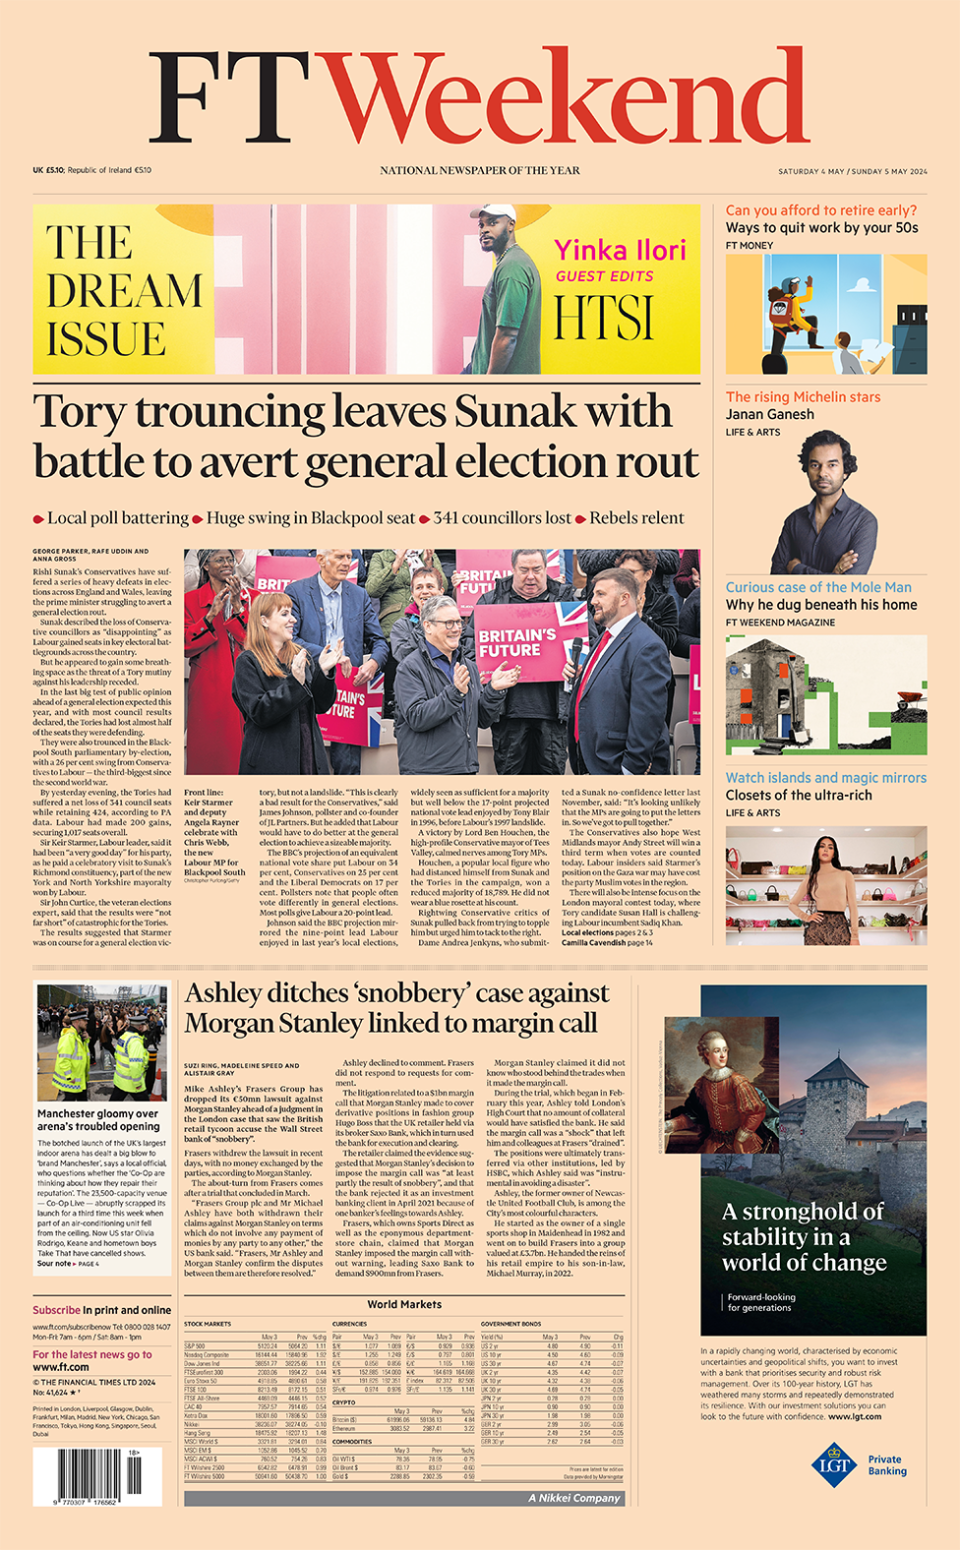 The main headline on the front page of the FT Weekend reads: "Tory trouncing leaves Sunak with battle to avert general election rout"